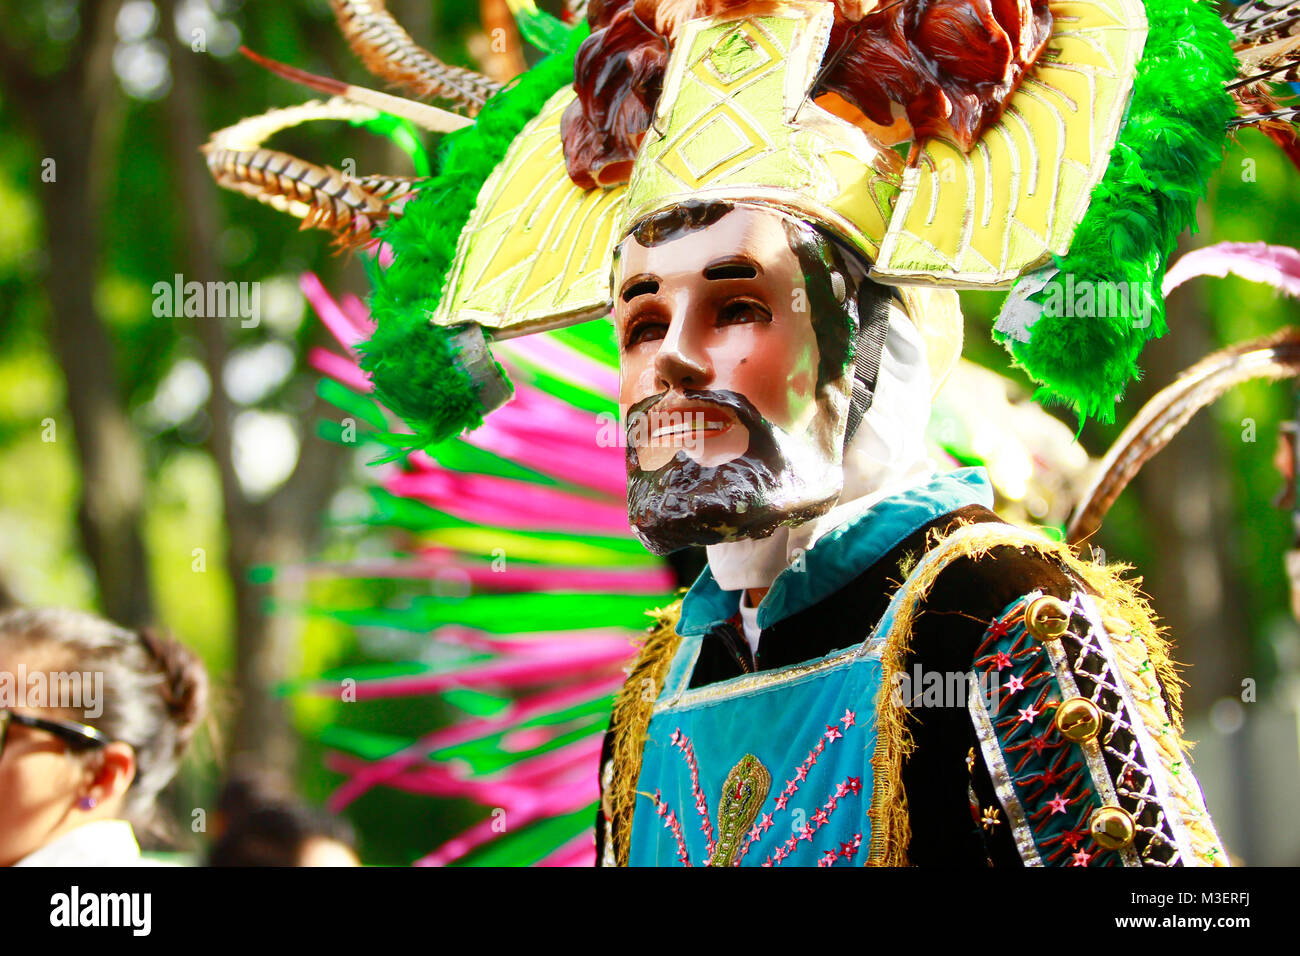 Carnival scene, a mexican Huehue dancer wearing a traditional mexican folk costume made of satin, plume and wooden mask rich in color Stock Photo